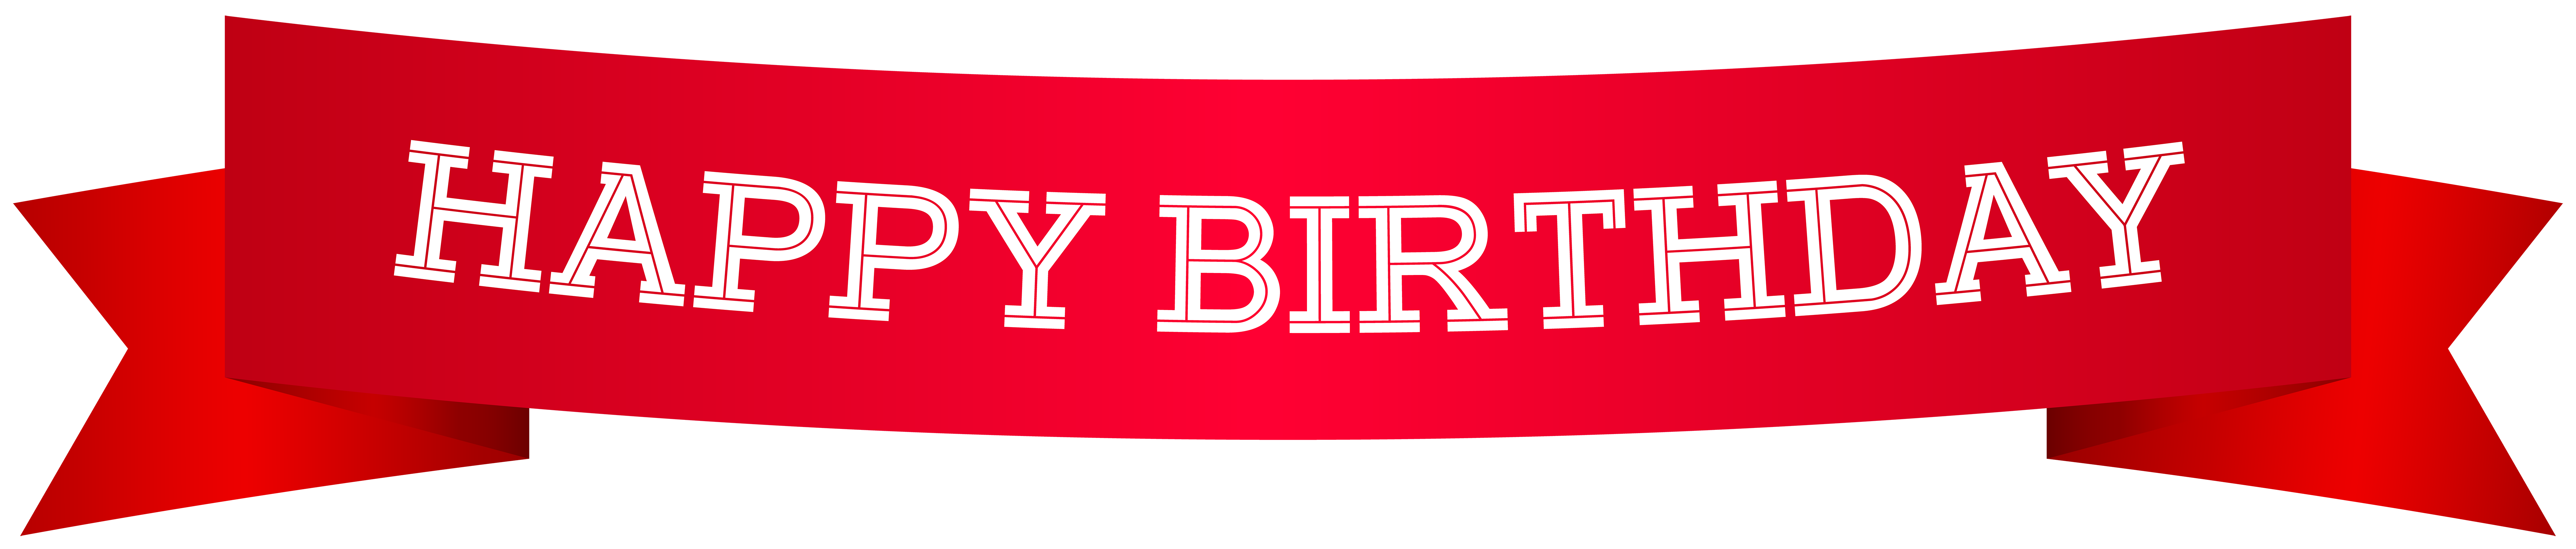 happy-birthday-banner-red-png-clip-art-image-gallery-yopriceville